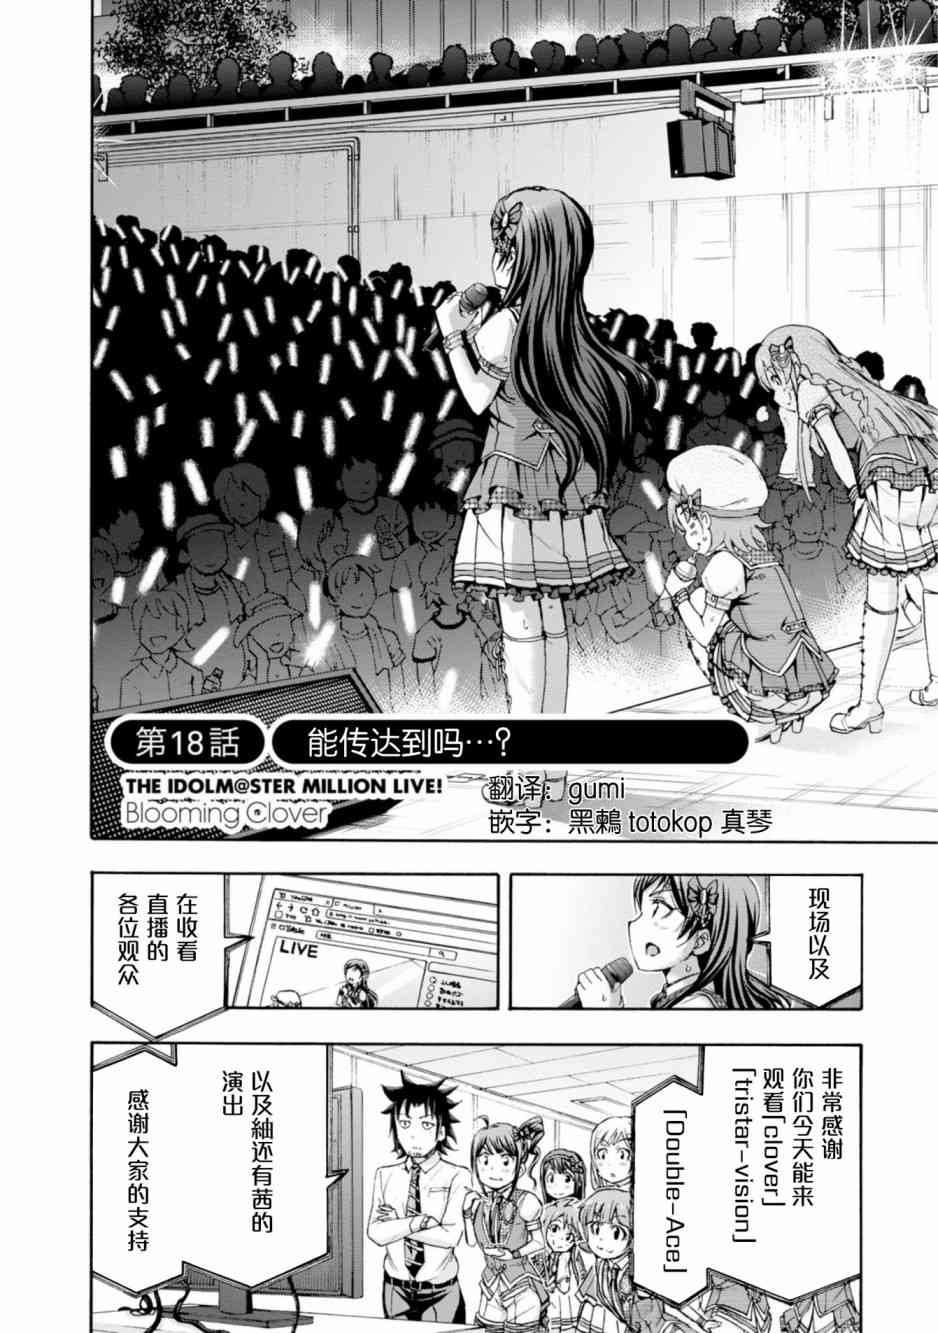 THE IDOLM@STER MILLION LIVE! Blooming Clover - 18話(1/2) - 3